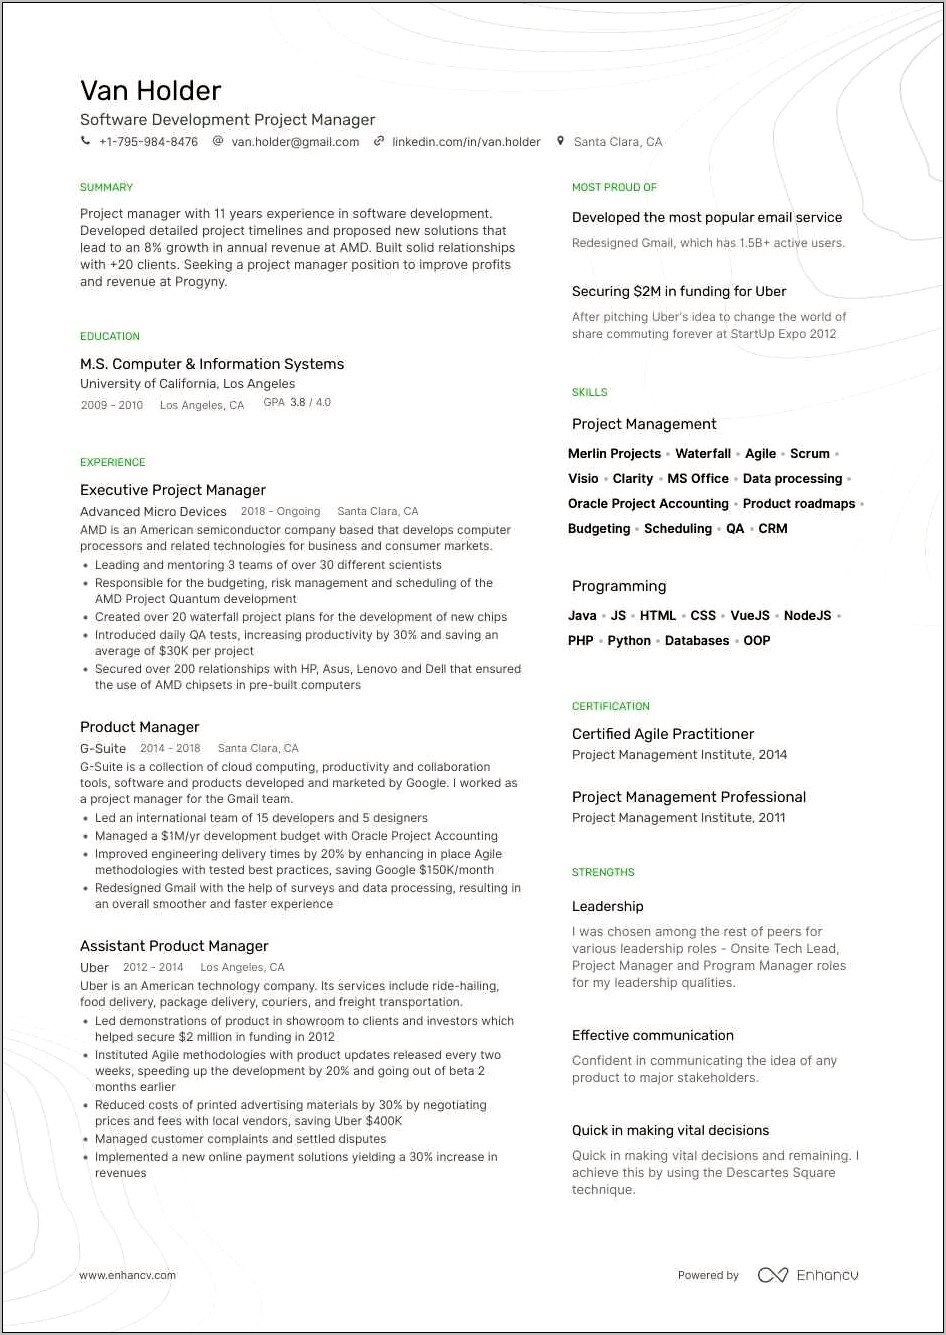 Resumes For Project Managers Without Experience